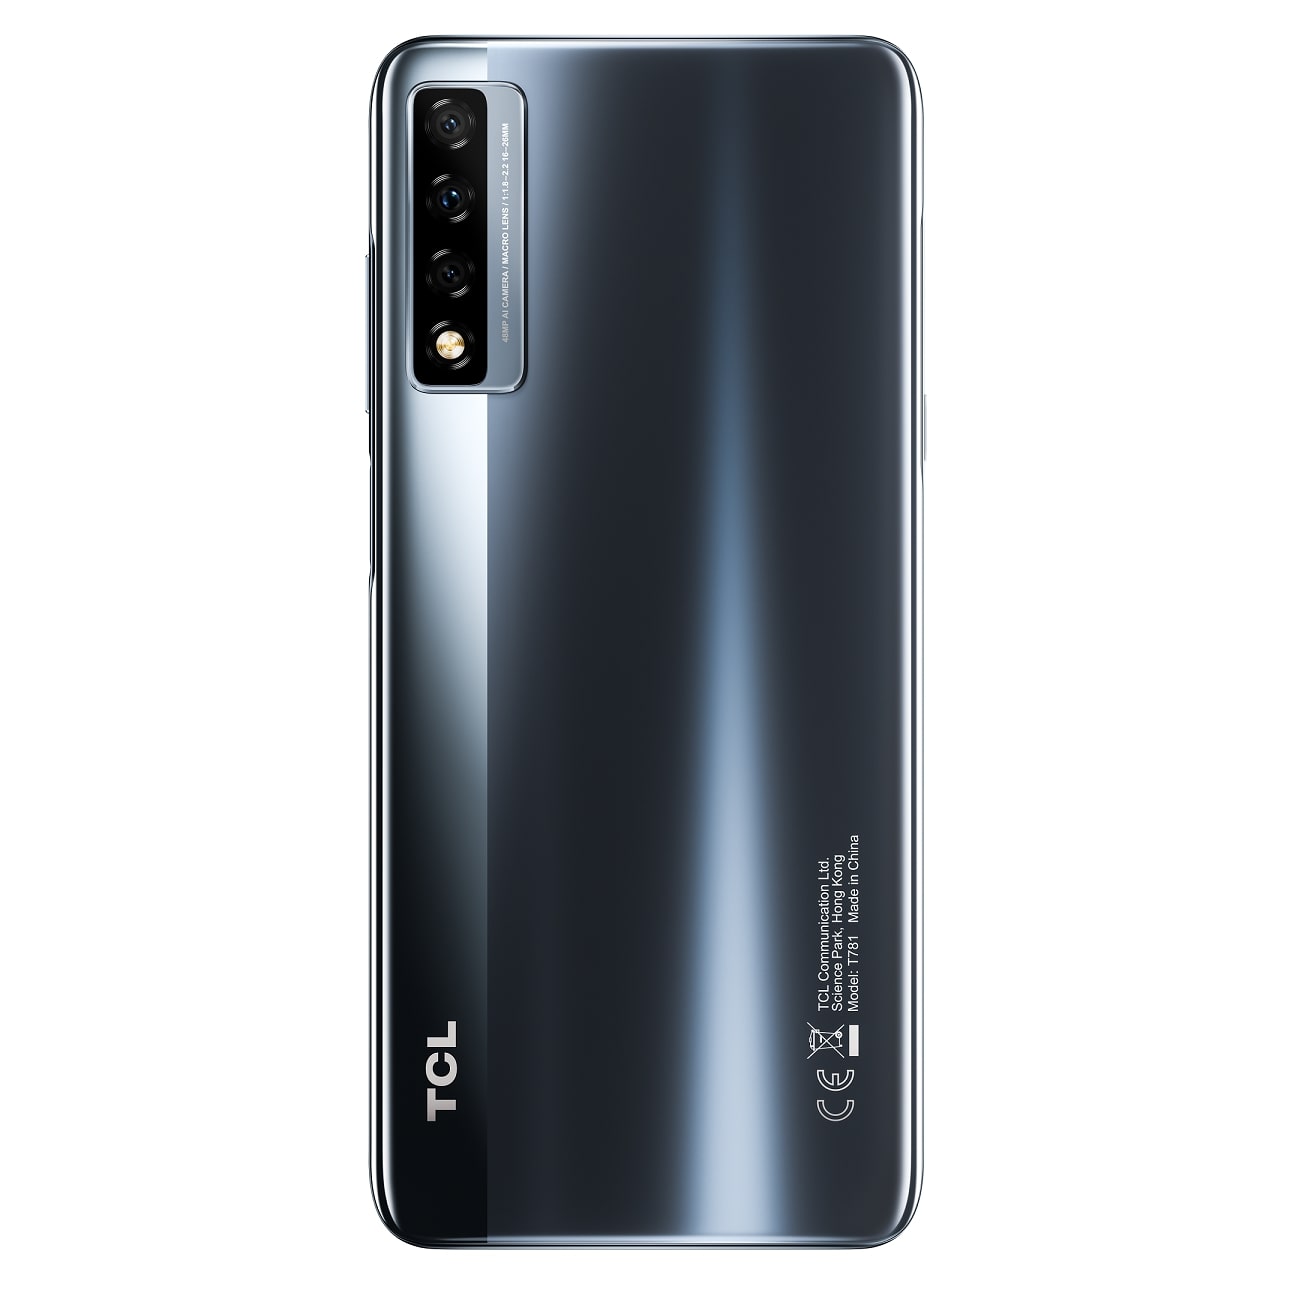 TCL 20 5G